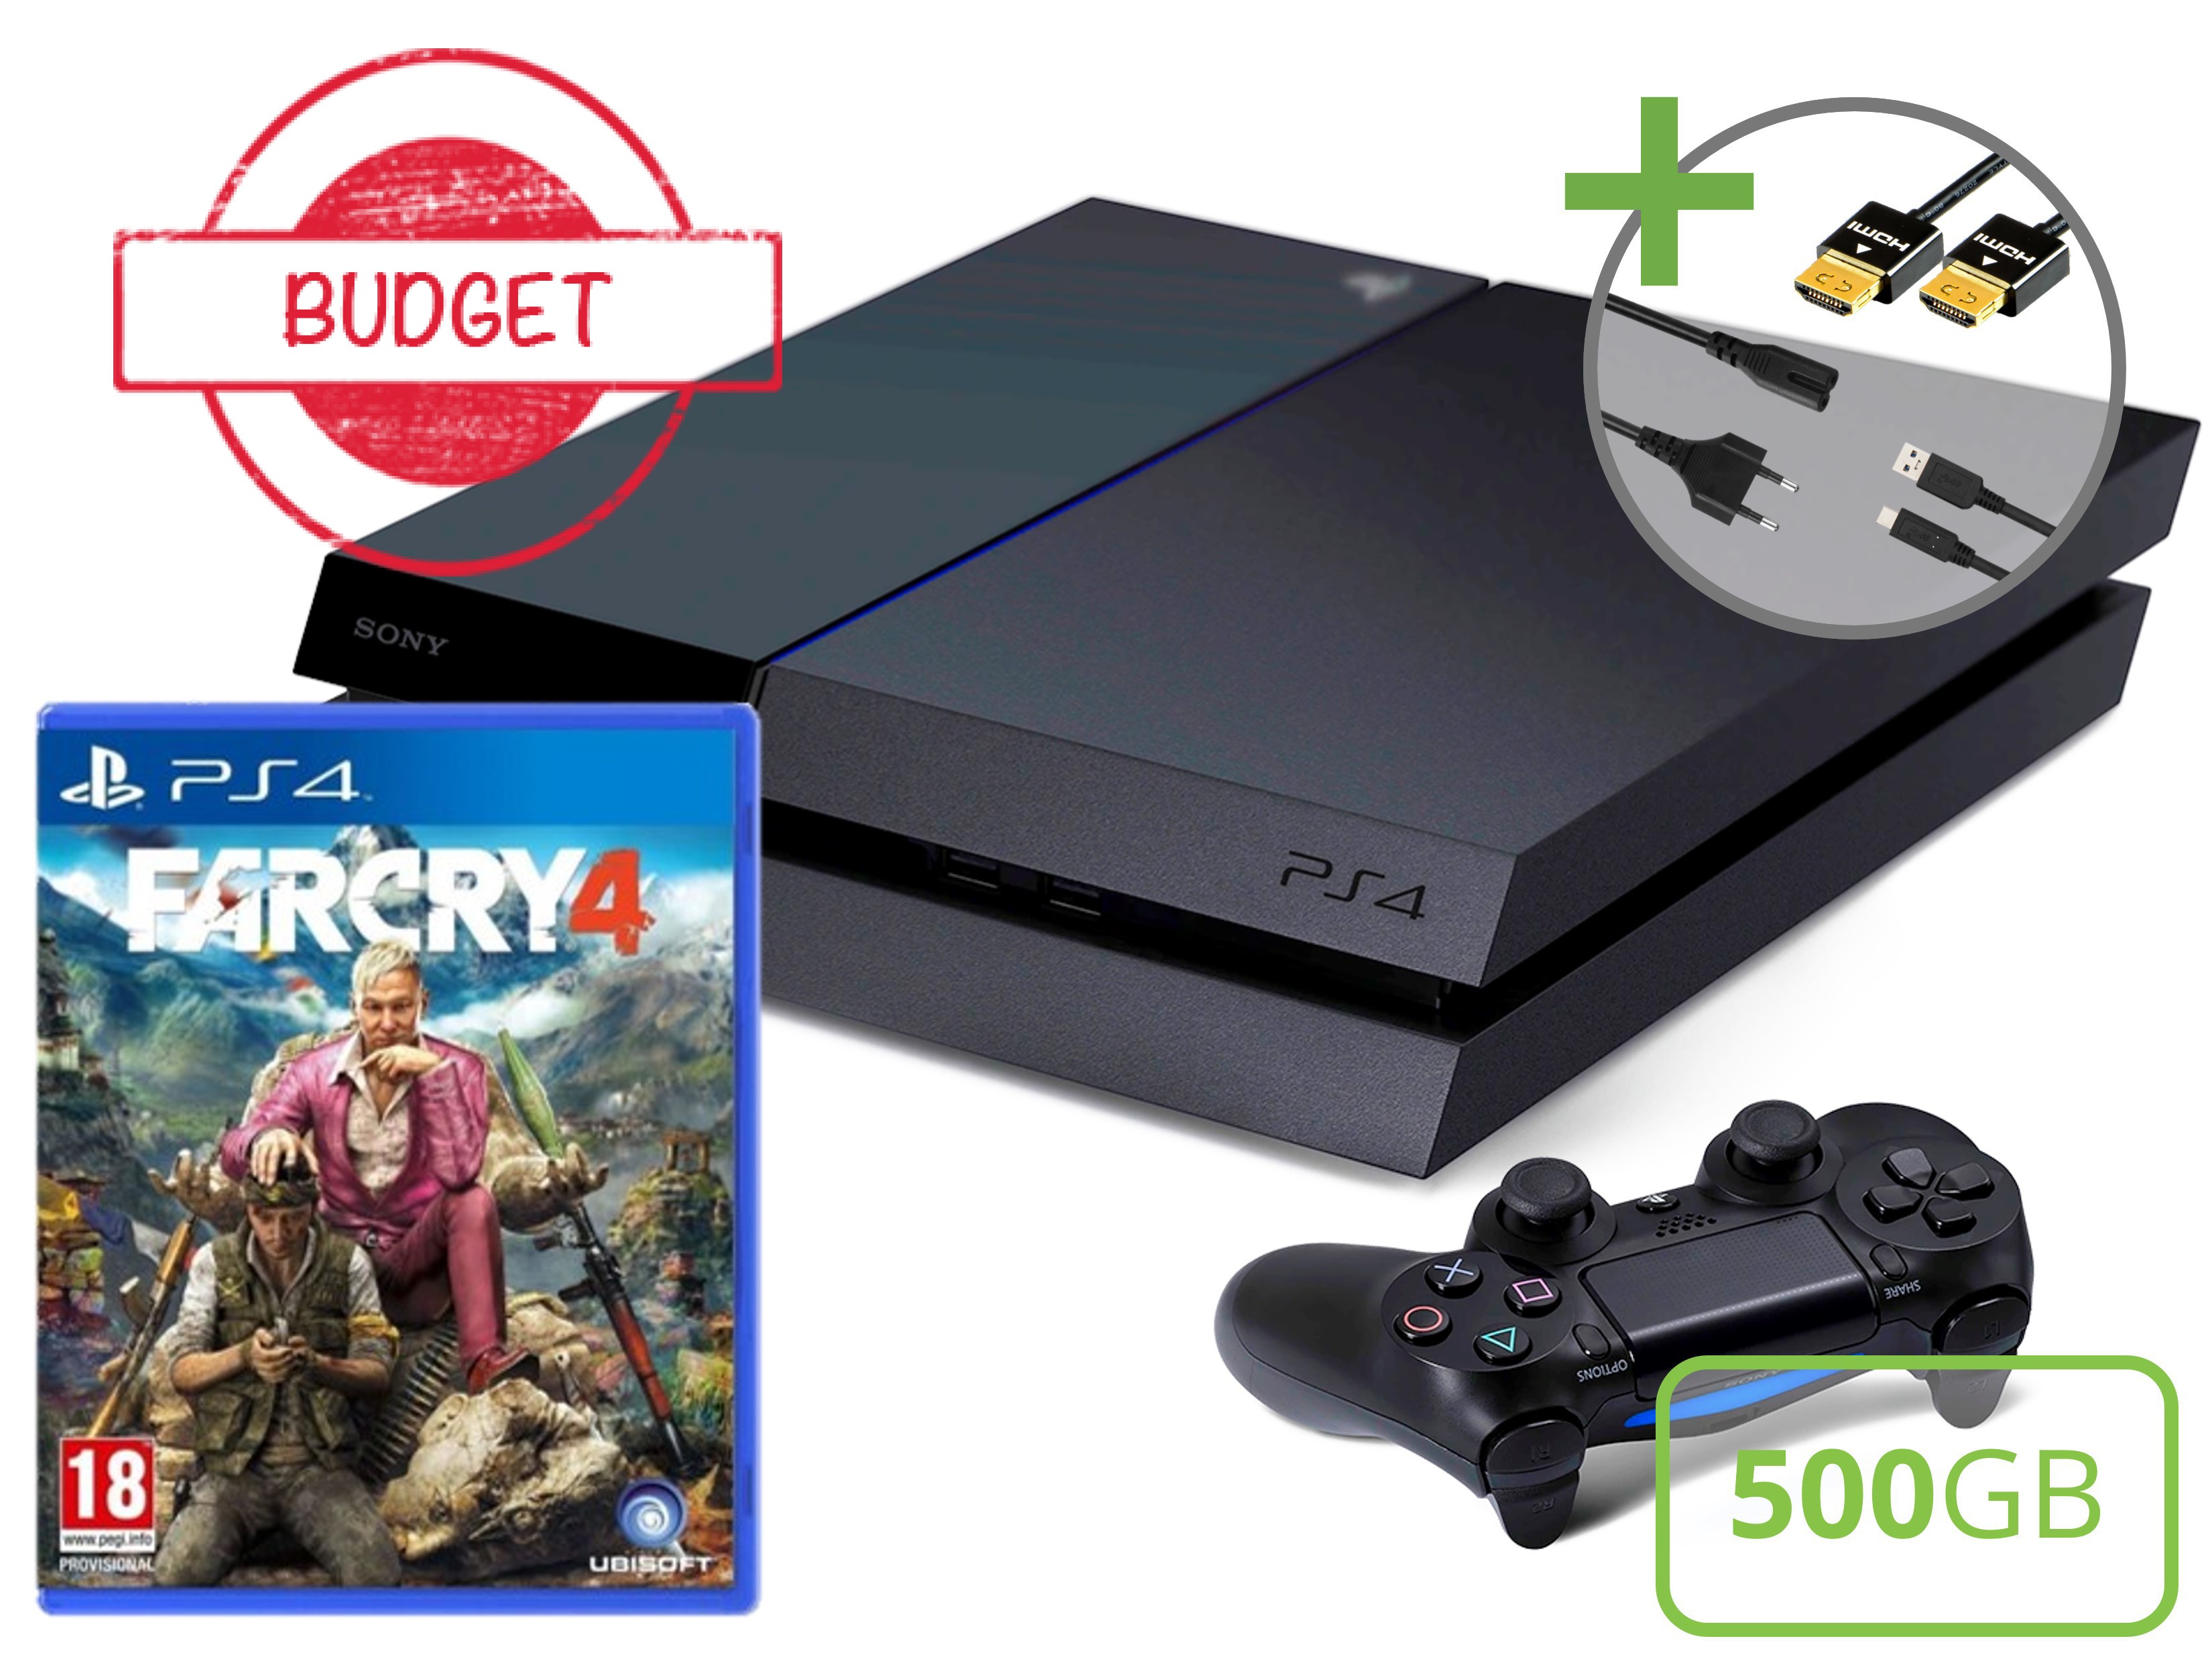 Sony PlayStation 4 Starter Pack - 500GB Far Cry 4 Edition - Budget Kopen | Playstation 4 Hardware